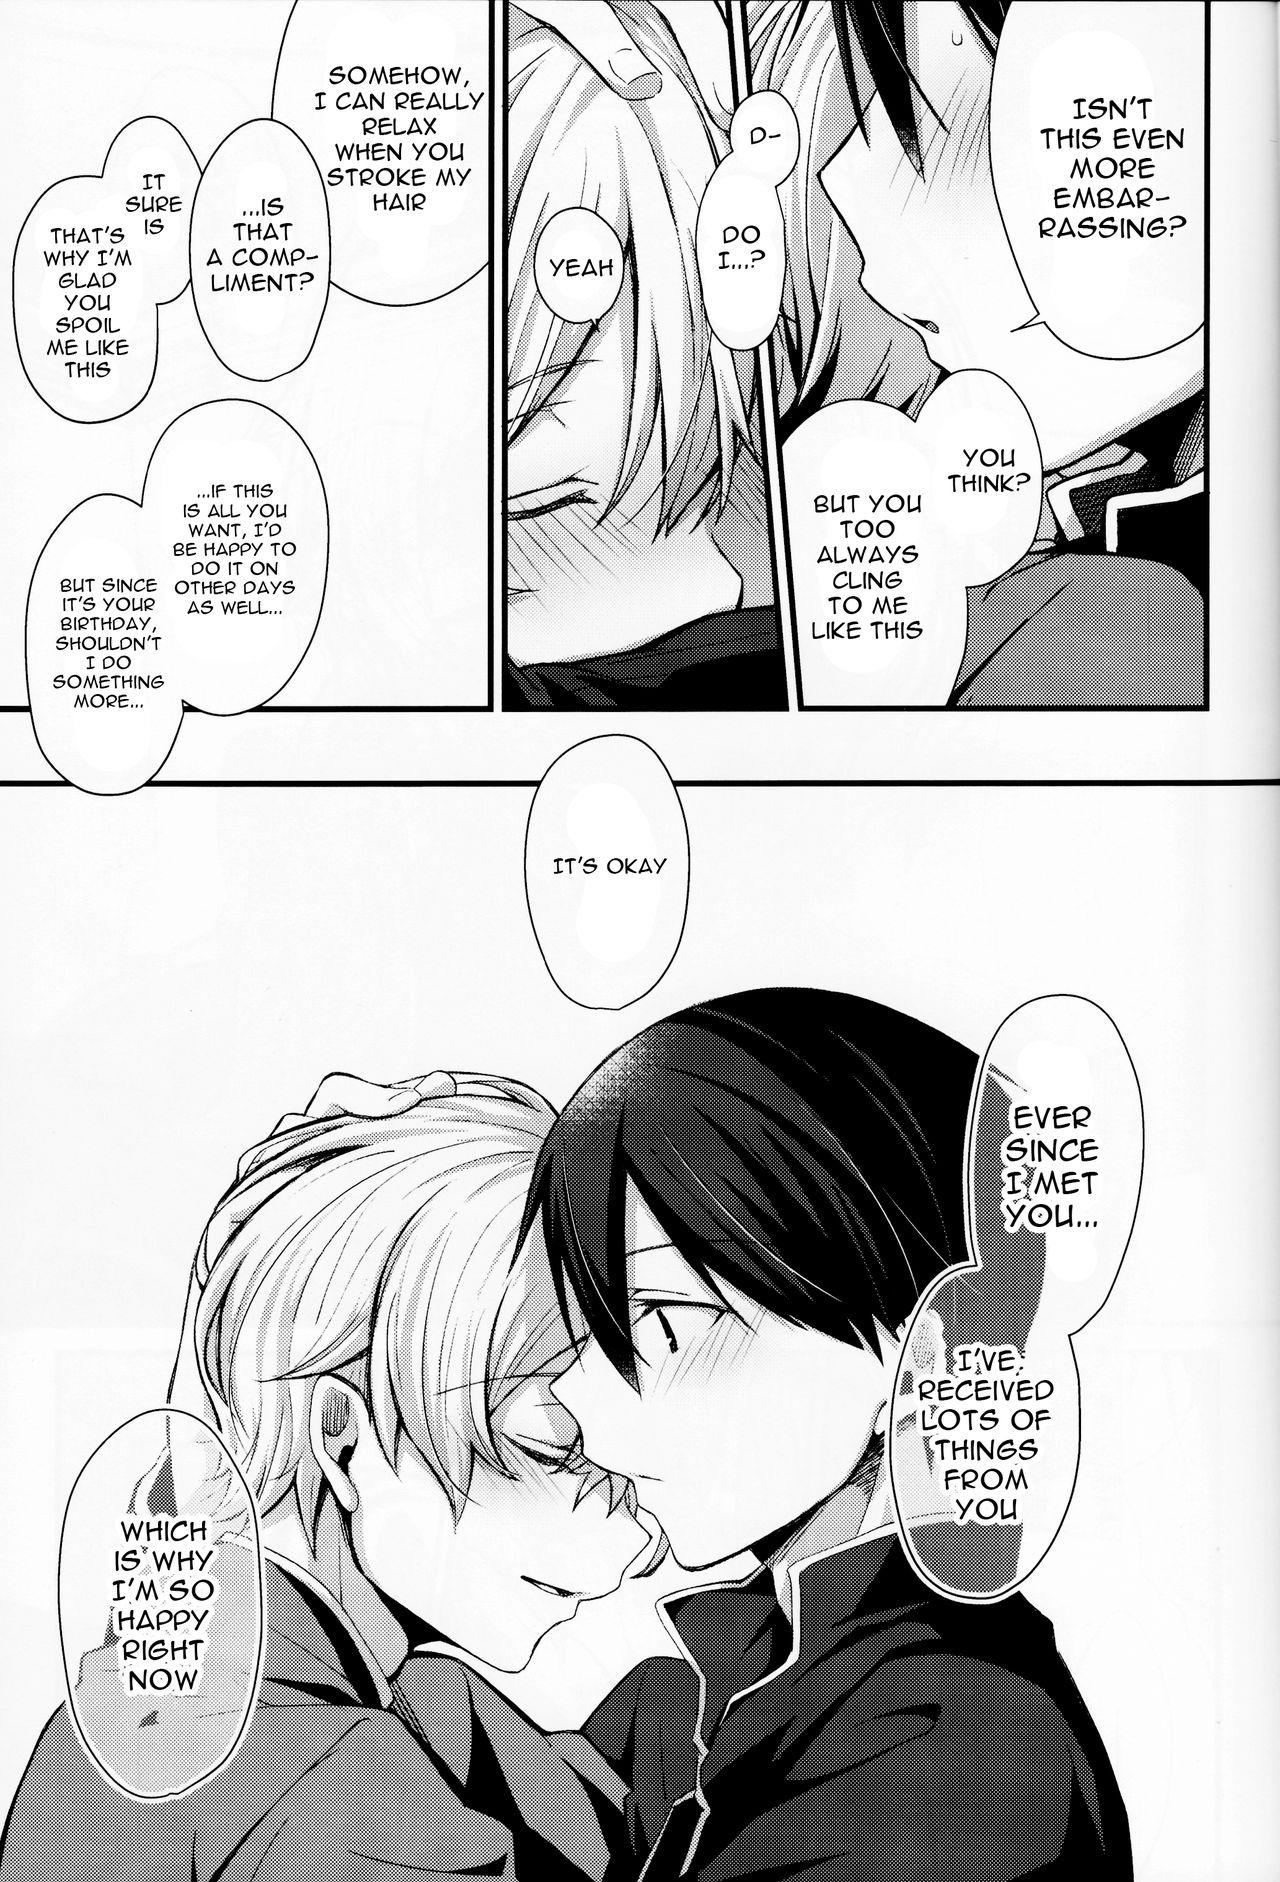 Abg All you need is... - Sword art online Gay - Page 8